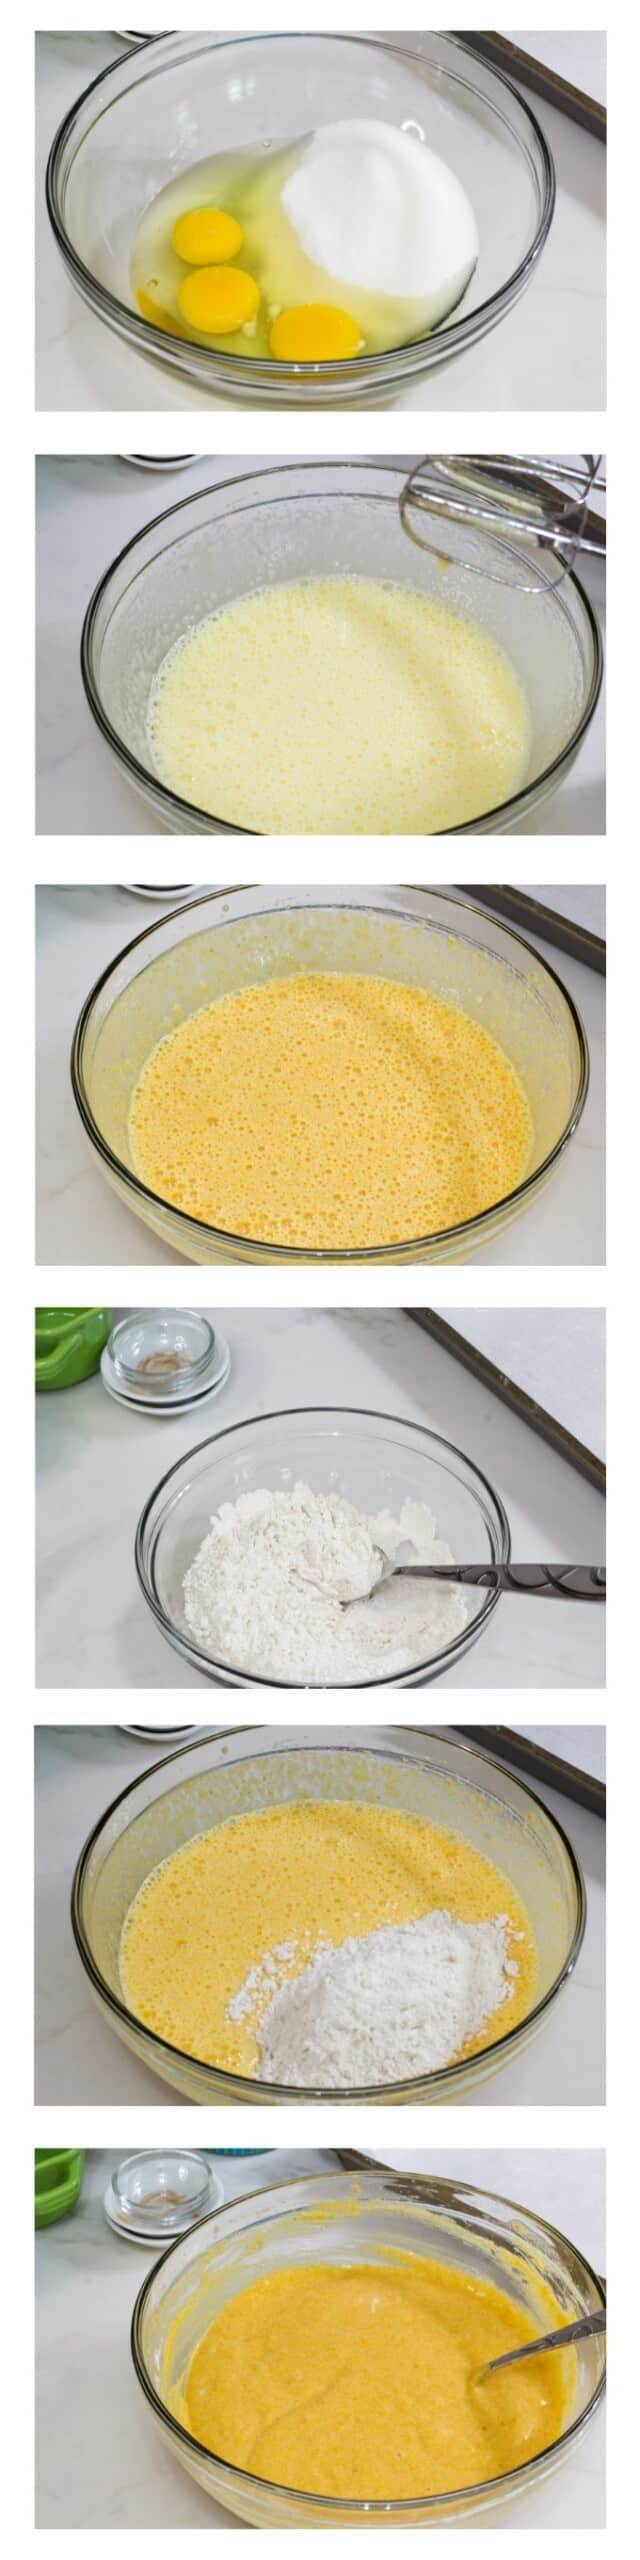 A collage of 6 images that show the steps to make the cake batter.